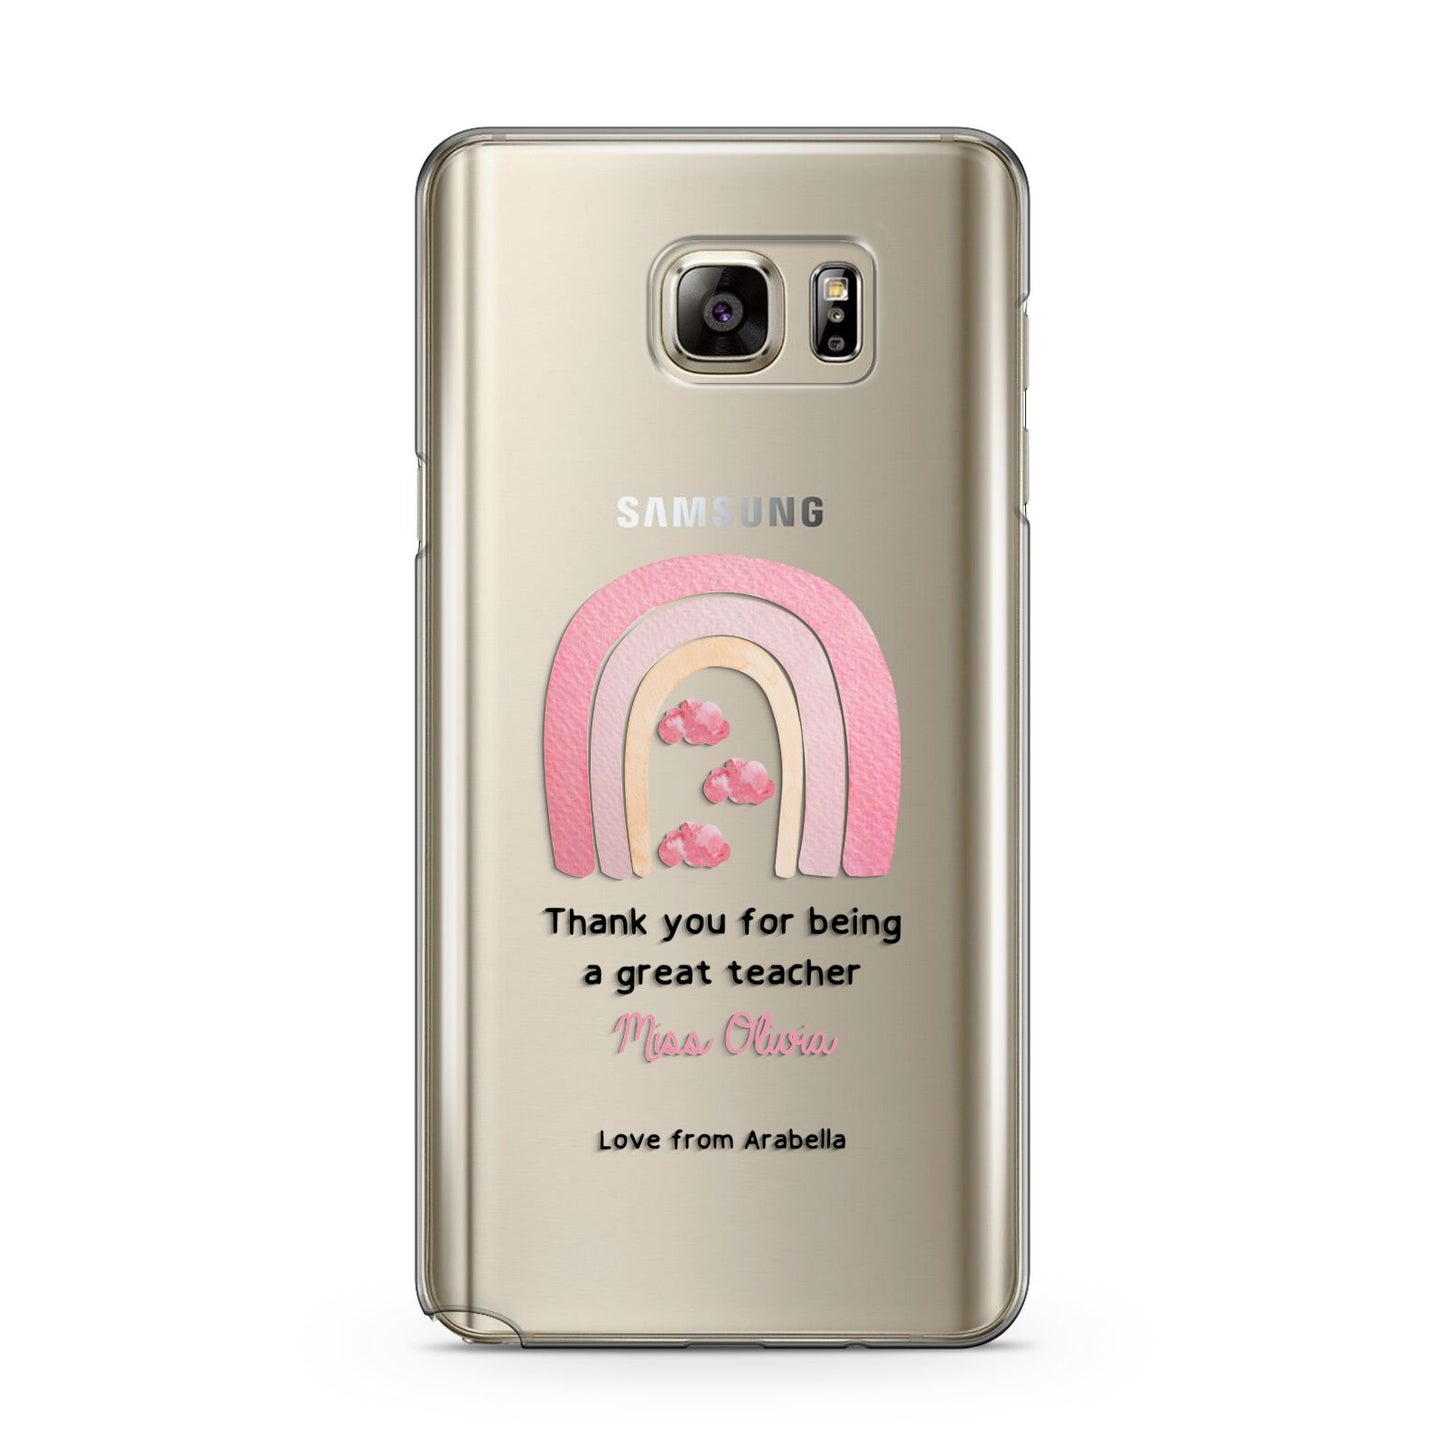 Personalised Teacher Thanks Samsung Galaxy Note 5 Case